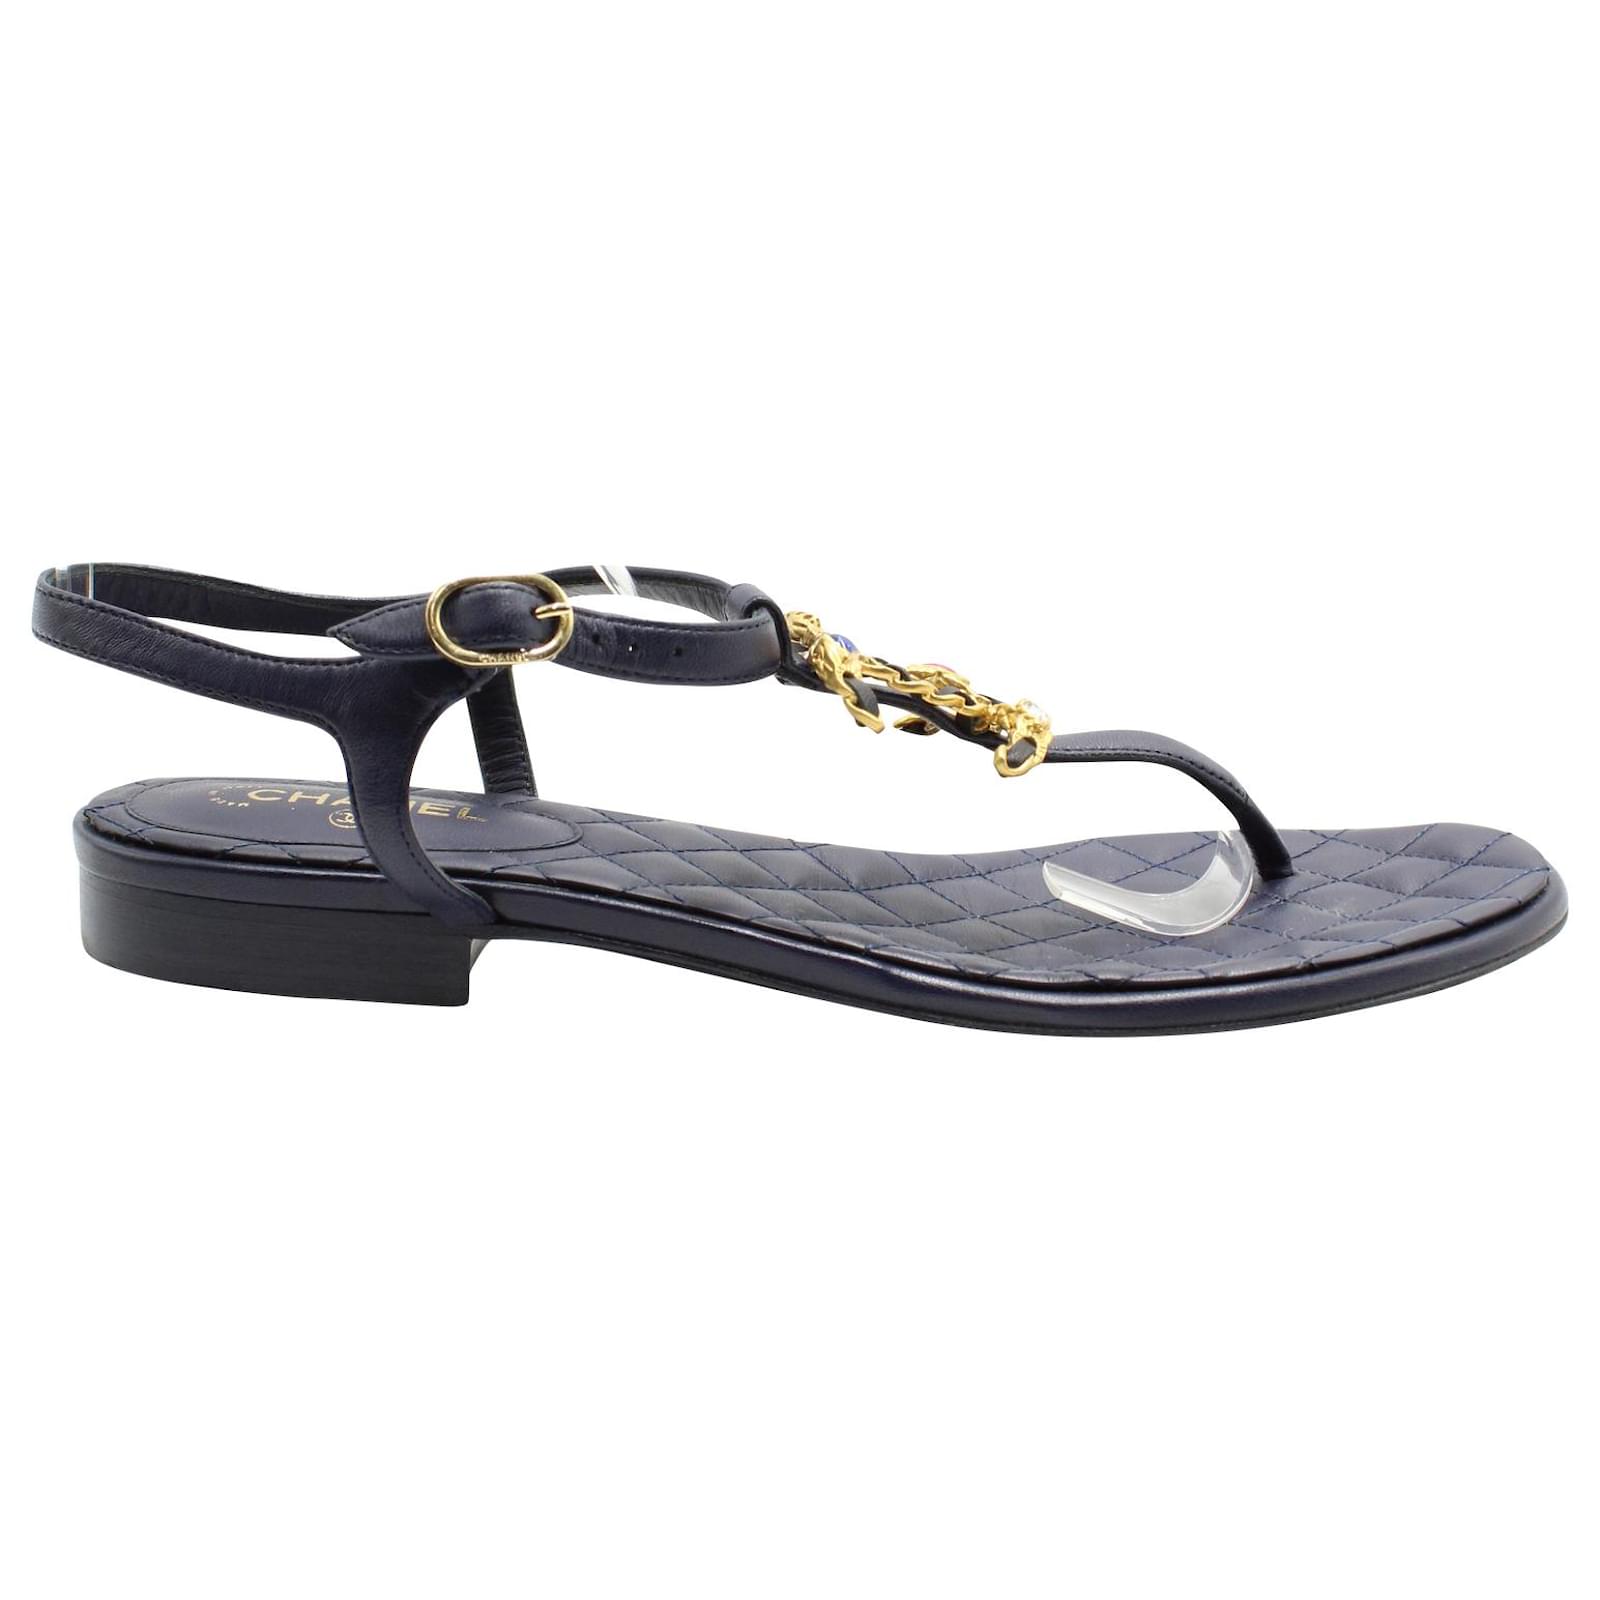 Chanel Thong Strappy Sandals in Navy Blue Leather